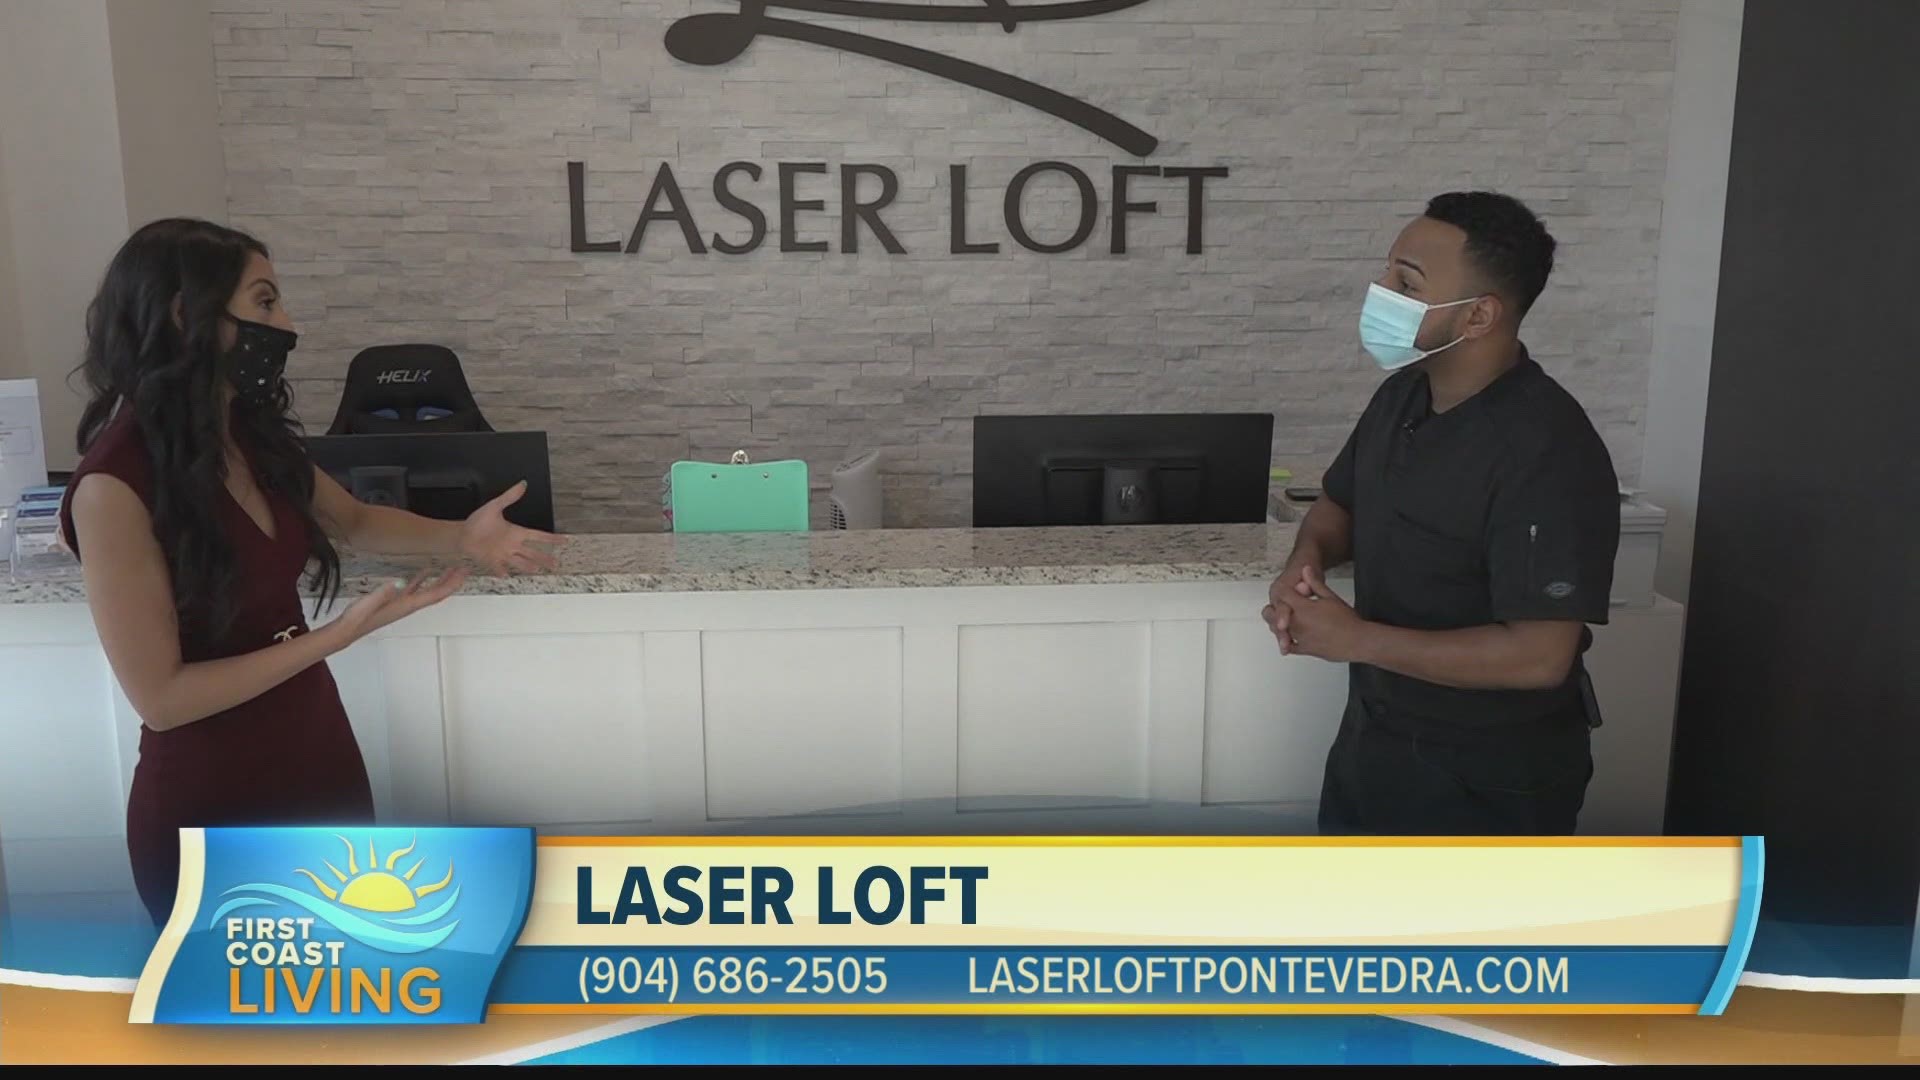 Get the body you've been wanting with the help of Laser Loft